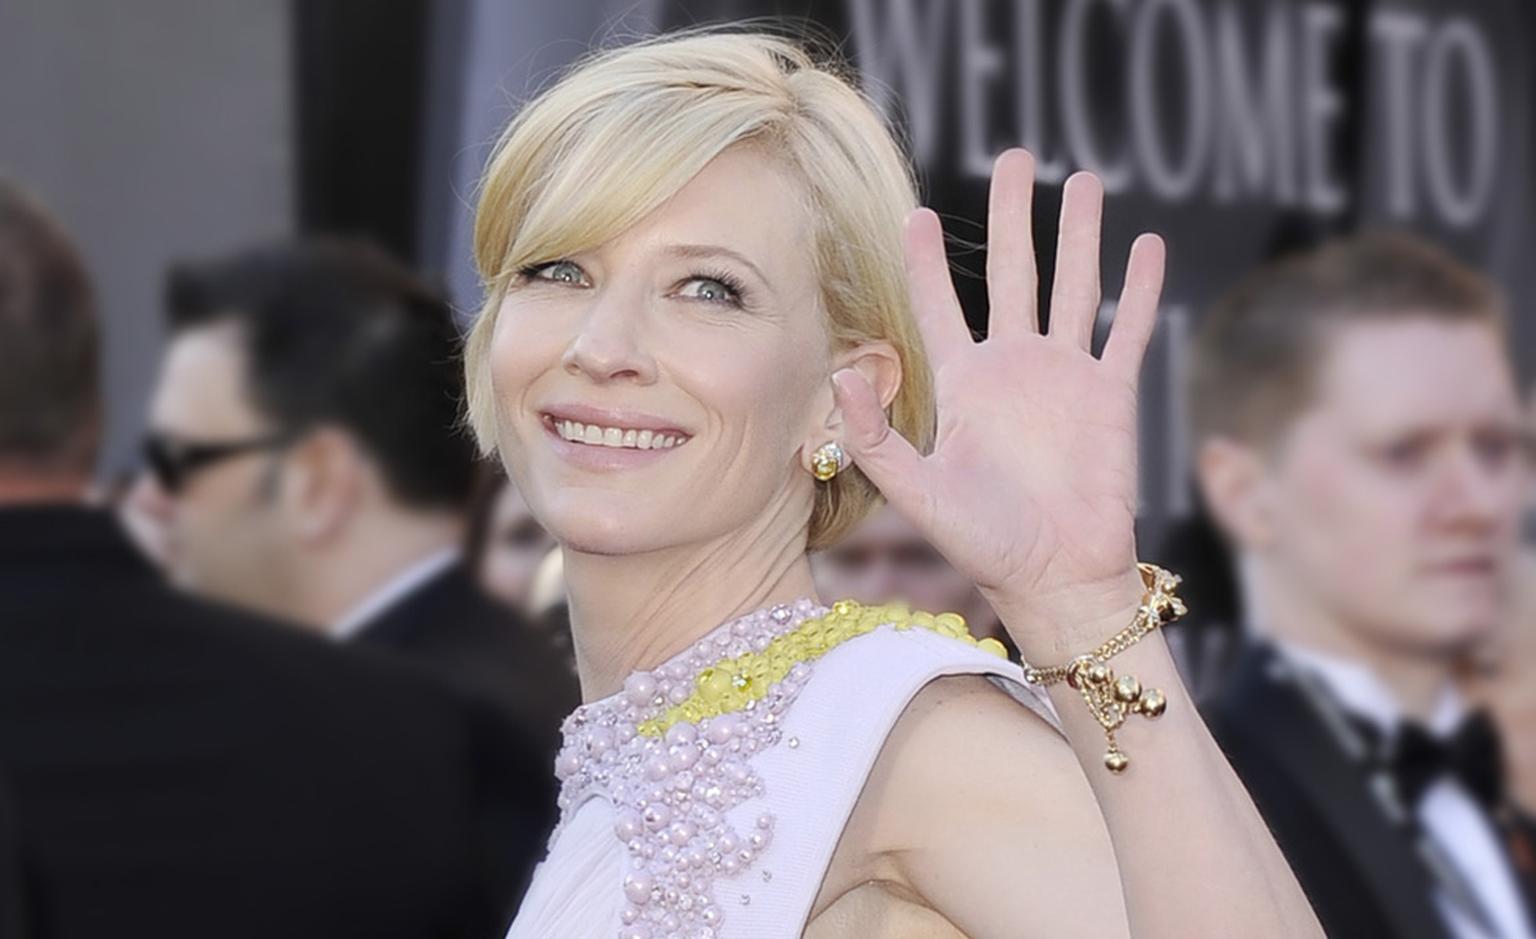 Cate-Blanchett wears vintage Van Cleef & Arpels to the Academy Awards. The bracelet is a 1946 Tassel Diamond bracelet and the earrings are from 1981 and set with white and yellow diamonds. Photo by Kevork Djansezian, Getty Images